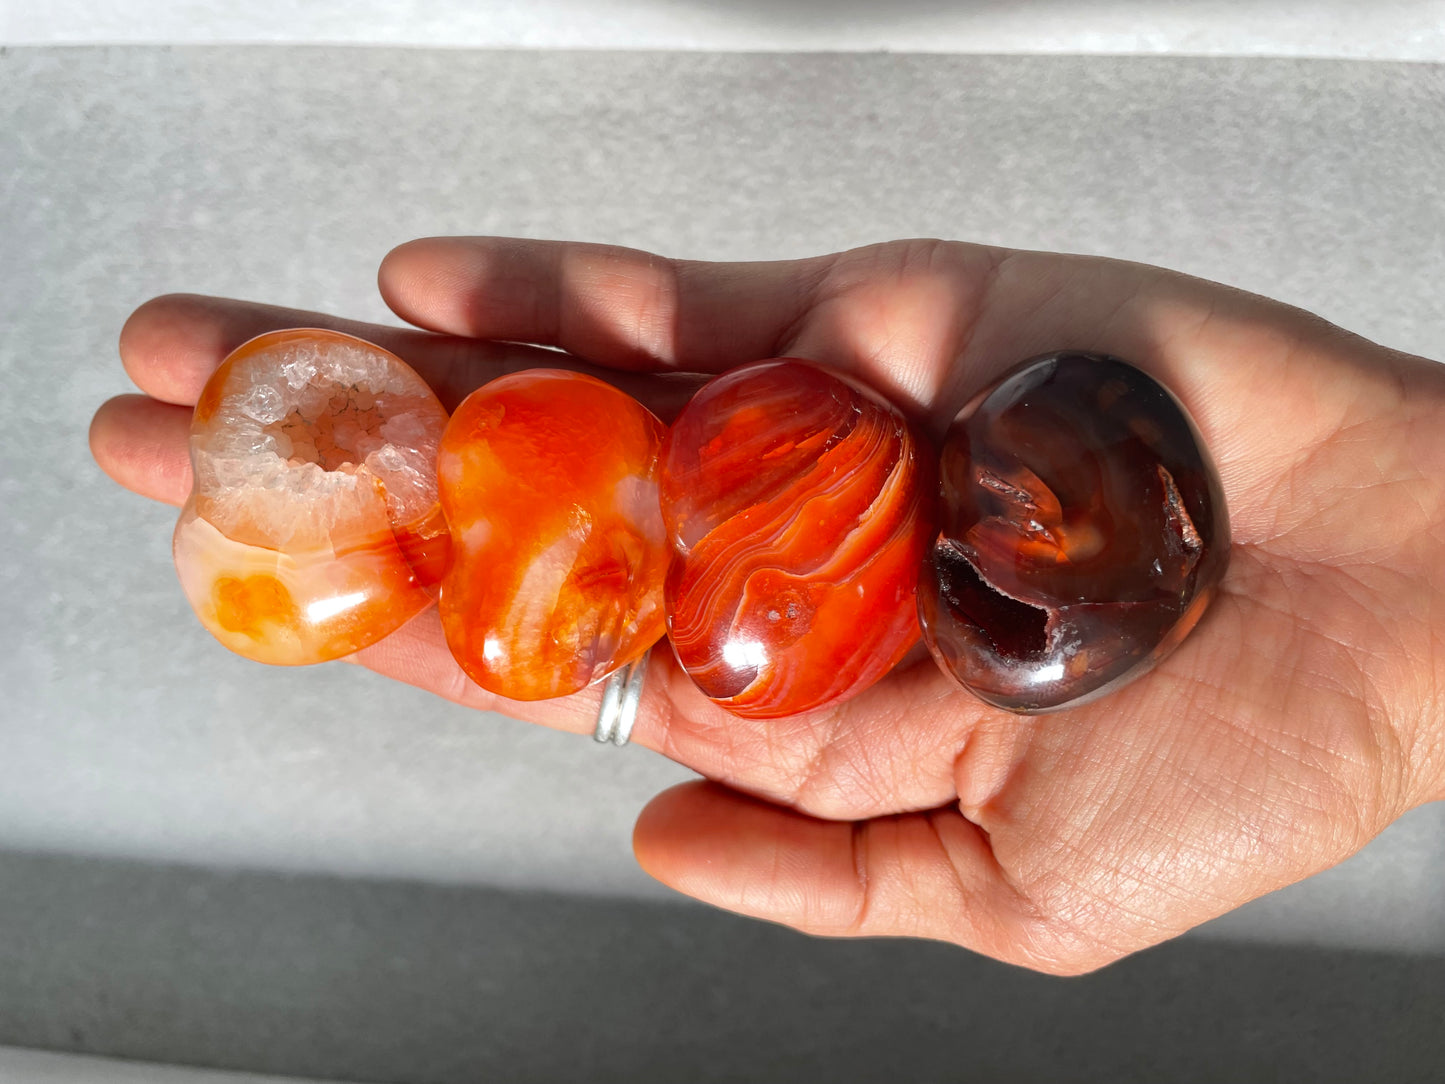 Carnelian Heart Palmstone 4-pc Set / Motivation, Stamina + Passion / $50 for collection